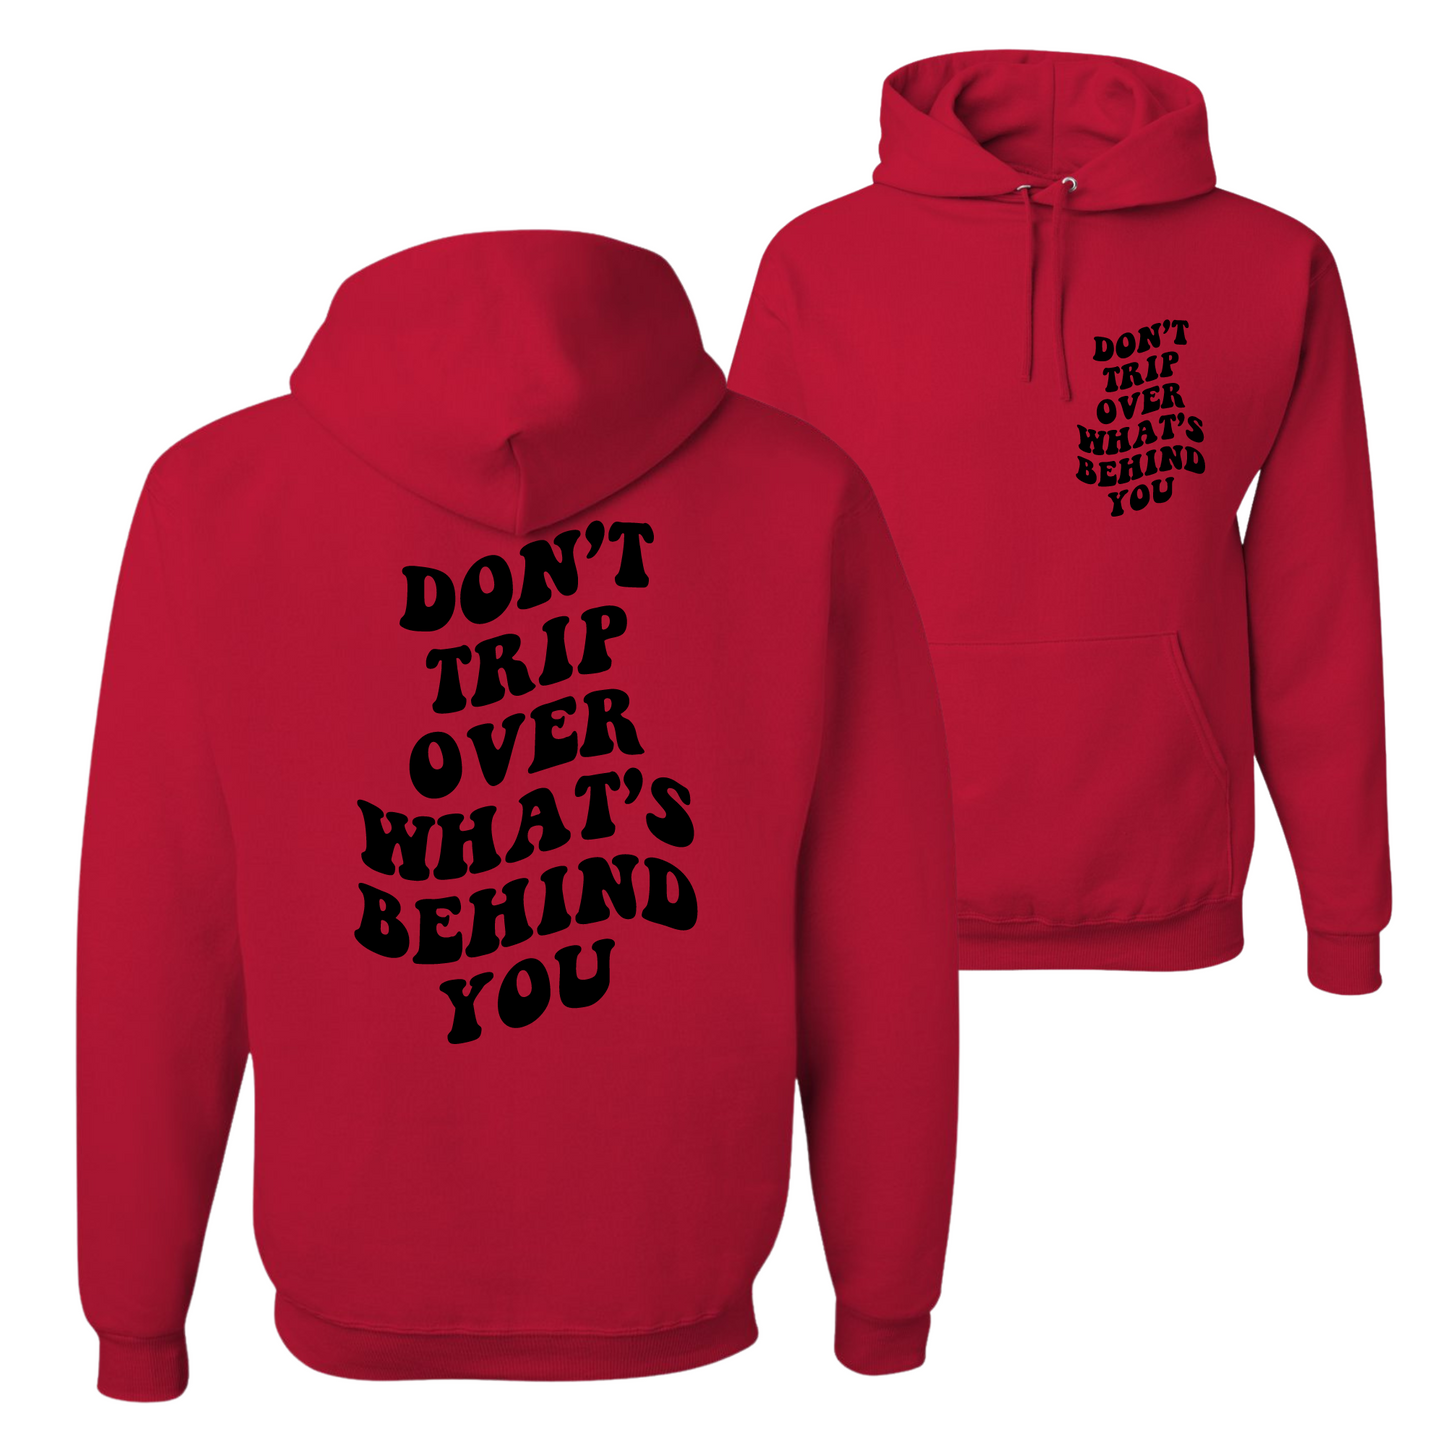 Resiliently Bold Don't Trip Over What's Behind You True Red Hooded Sweatshirt